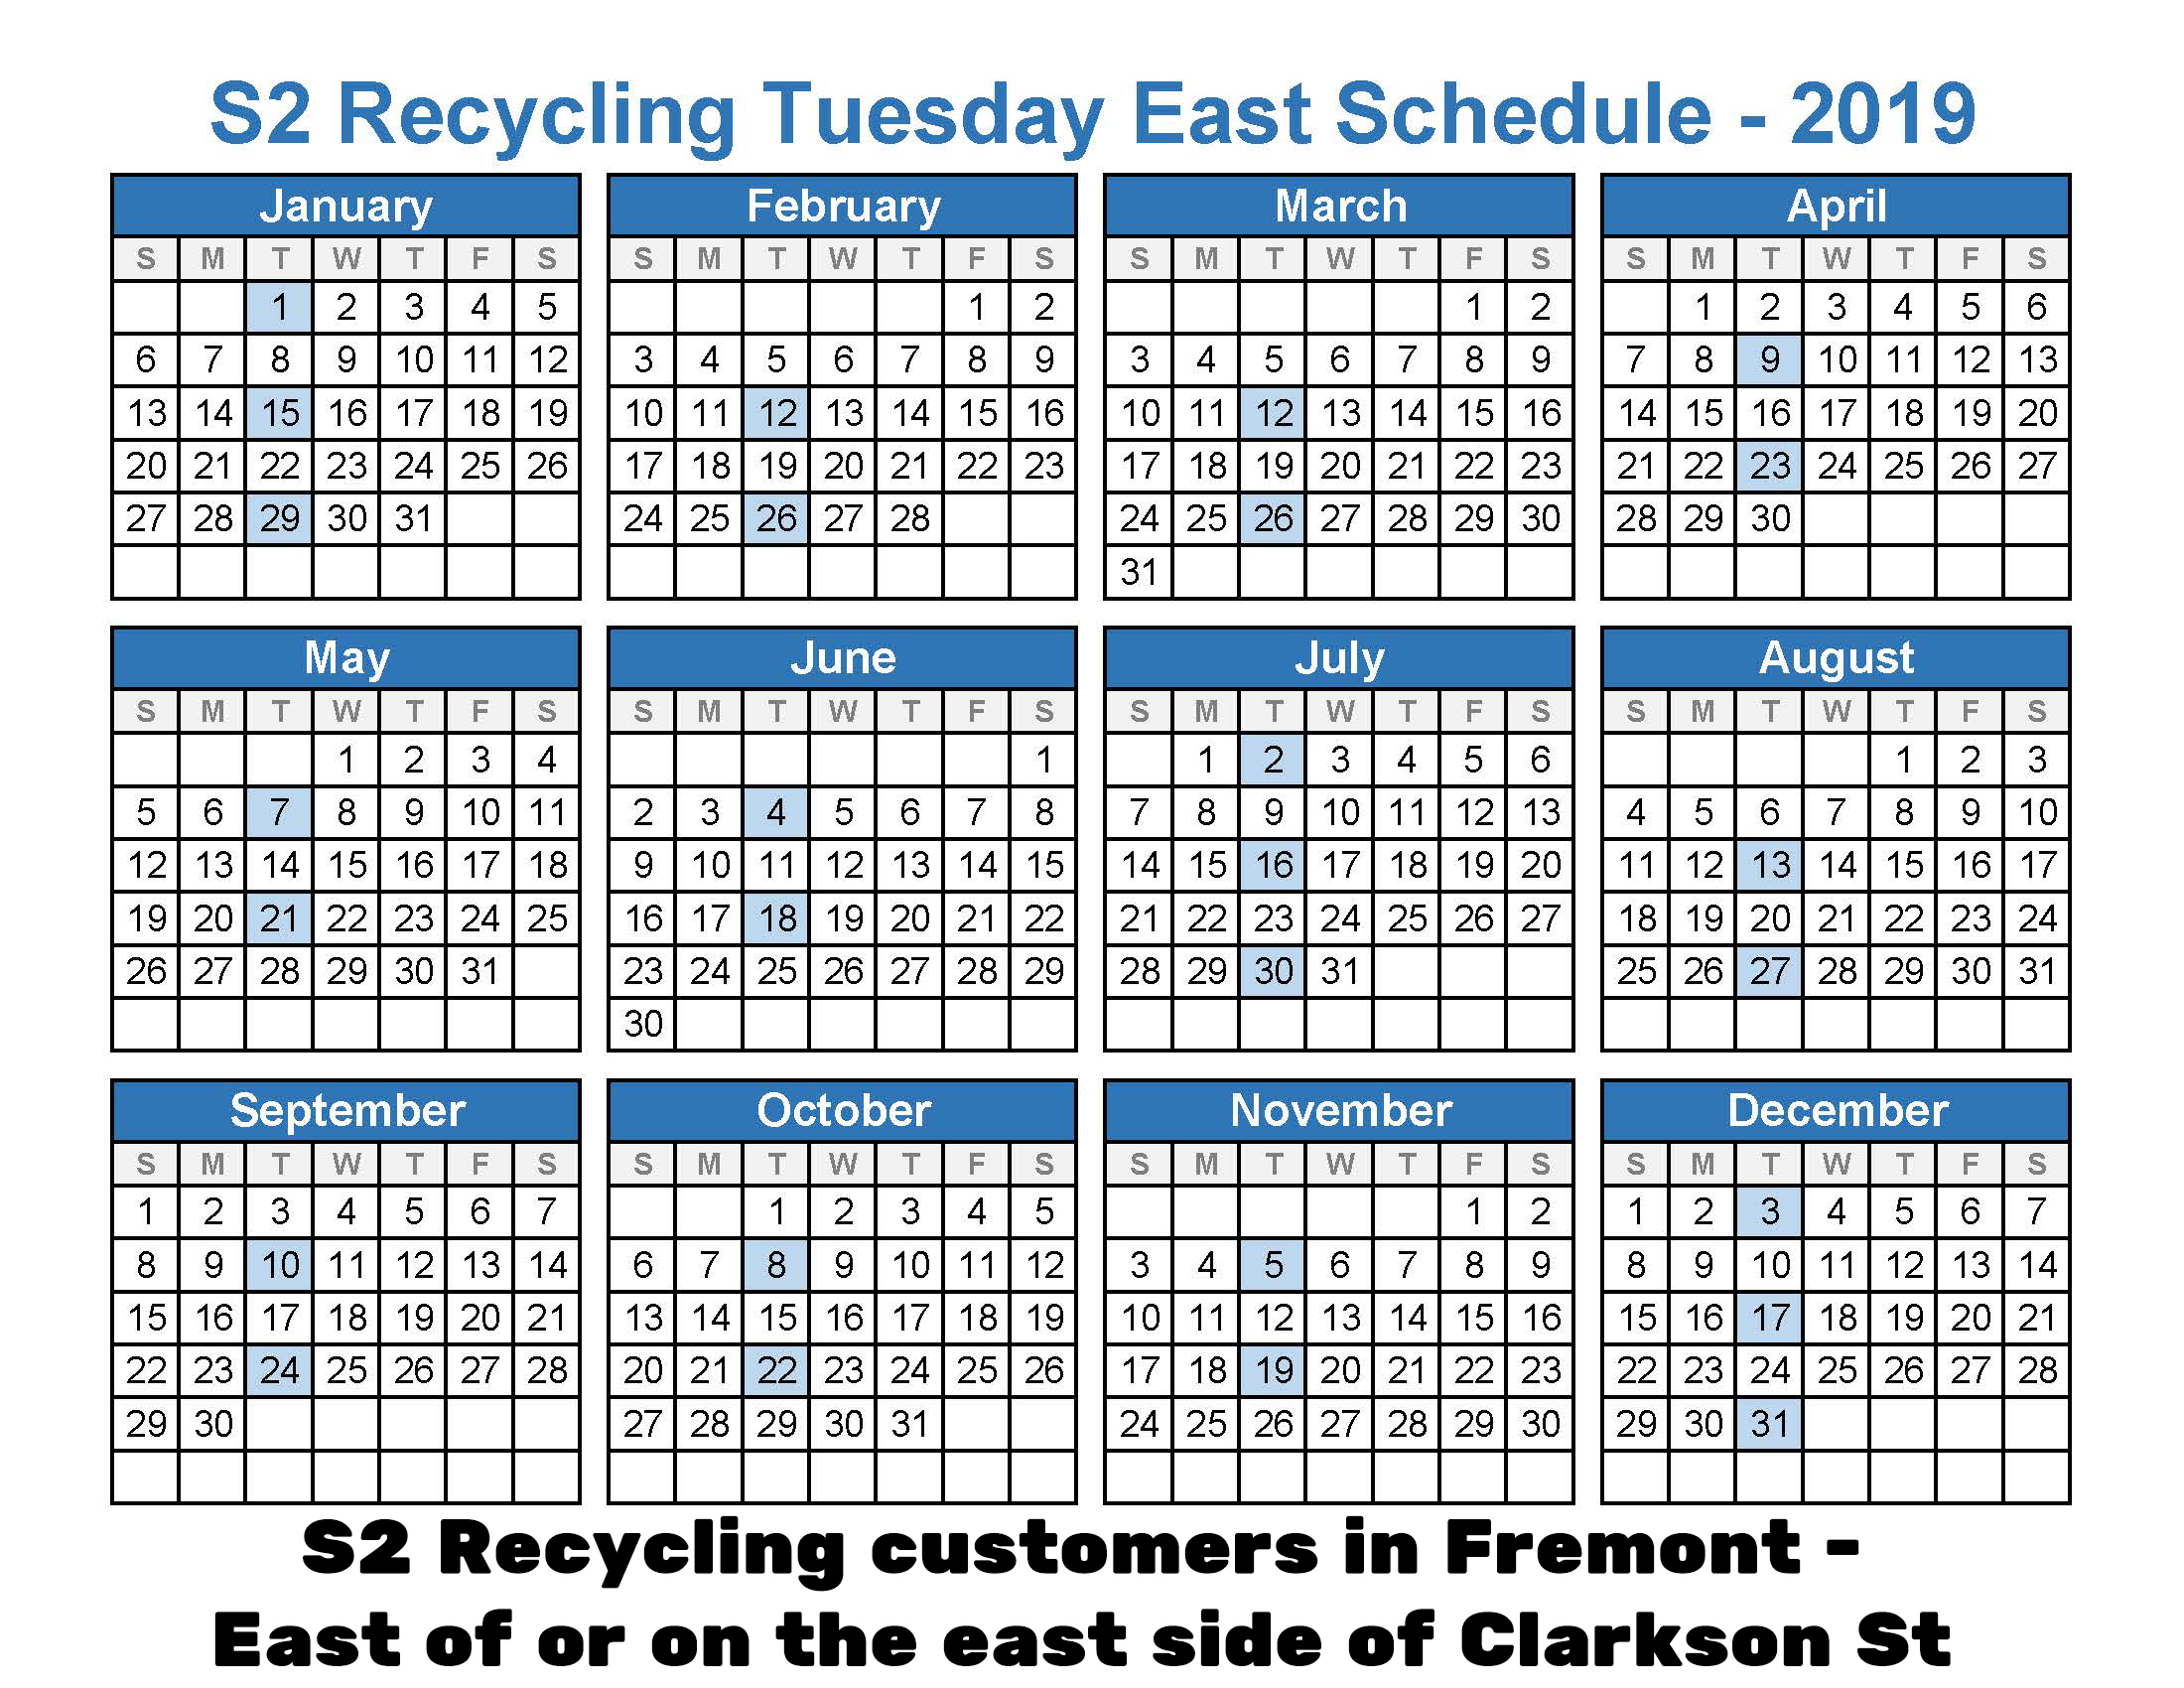 2019 Recycling Tuesday East Schedule